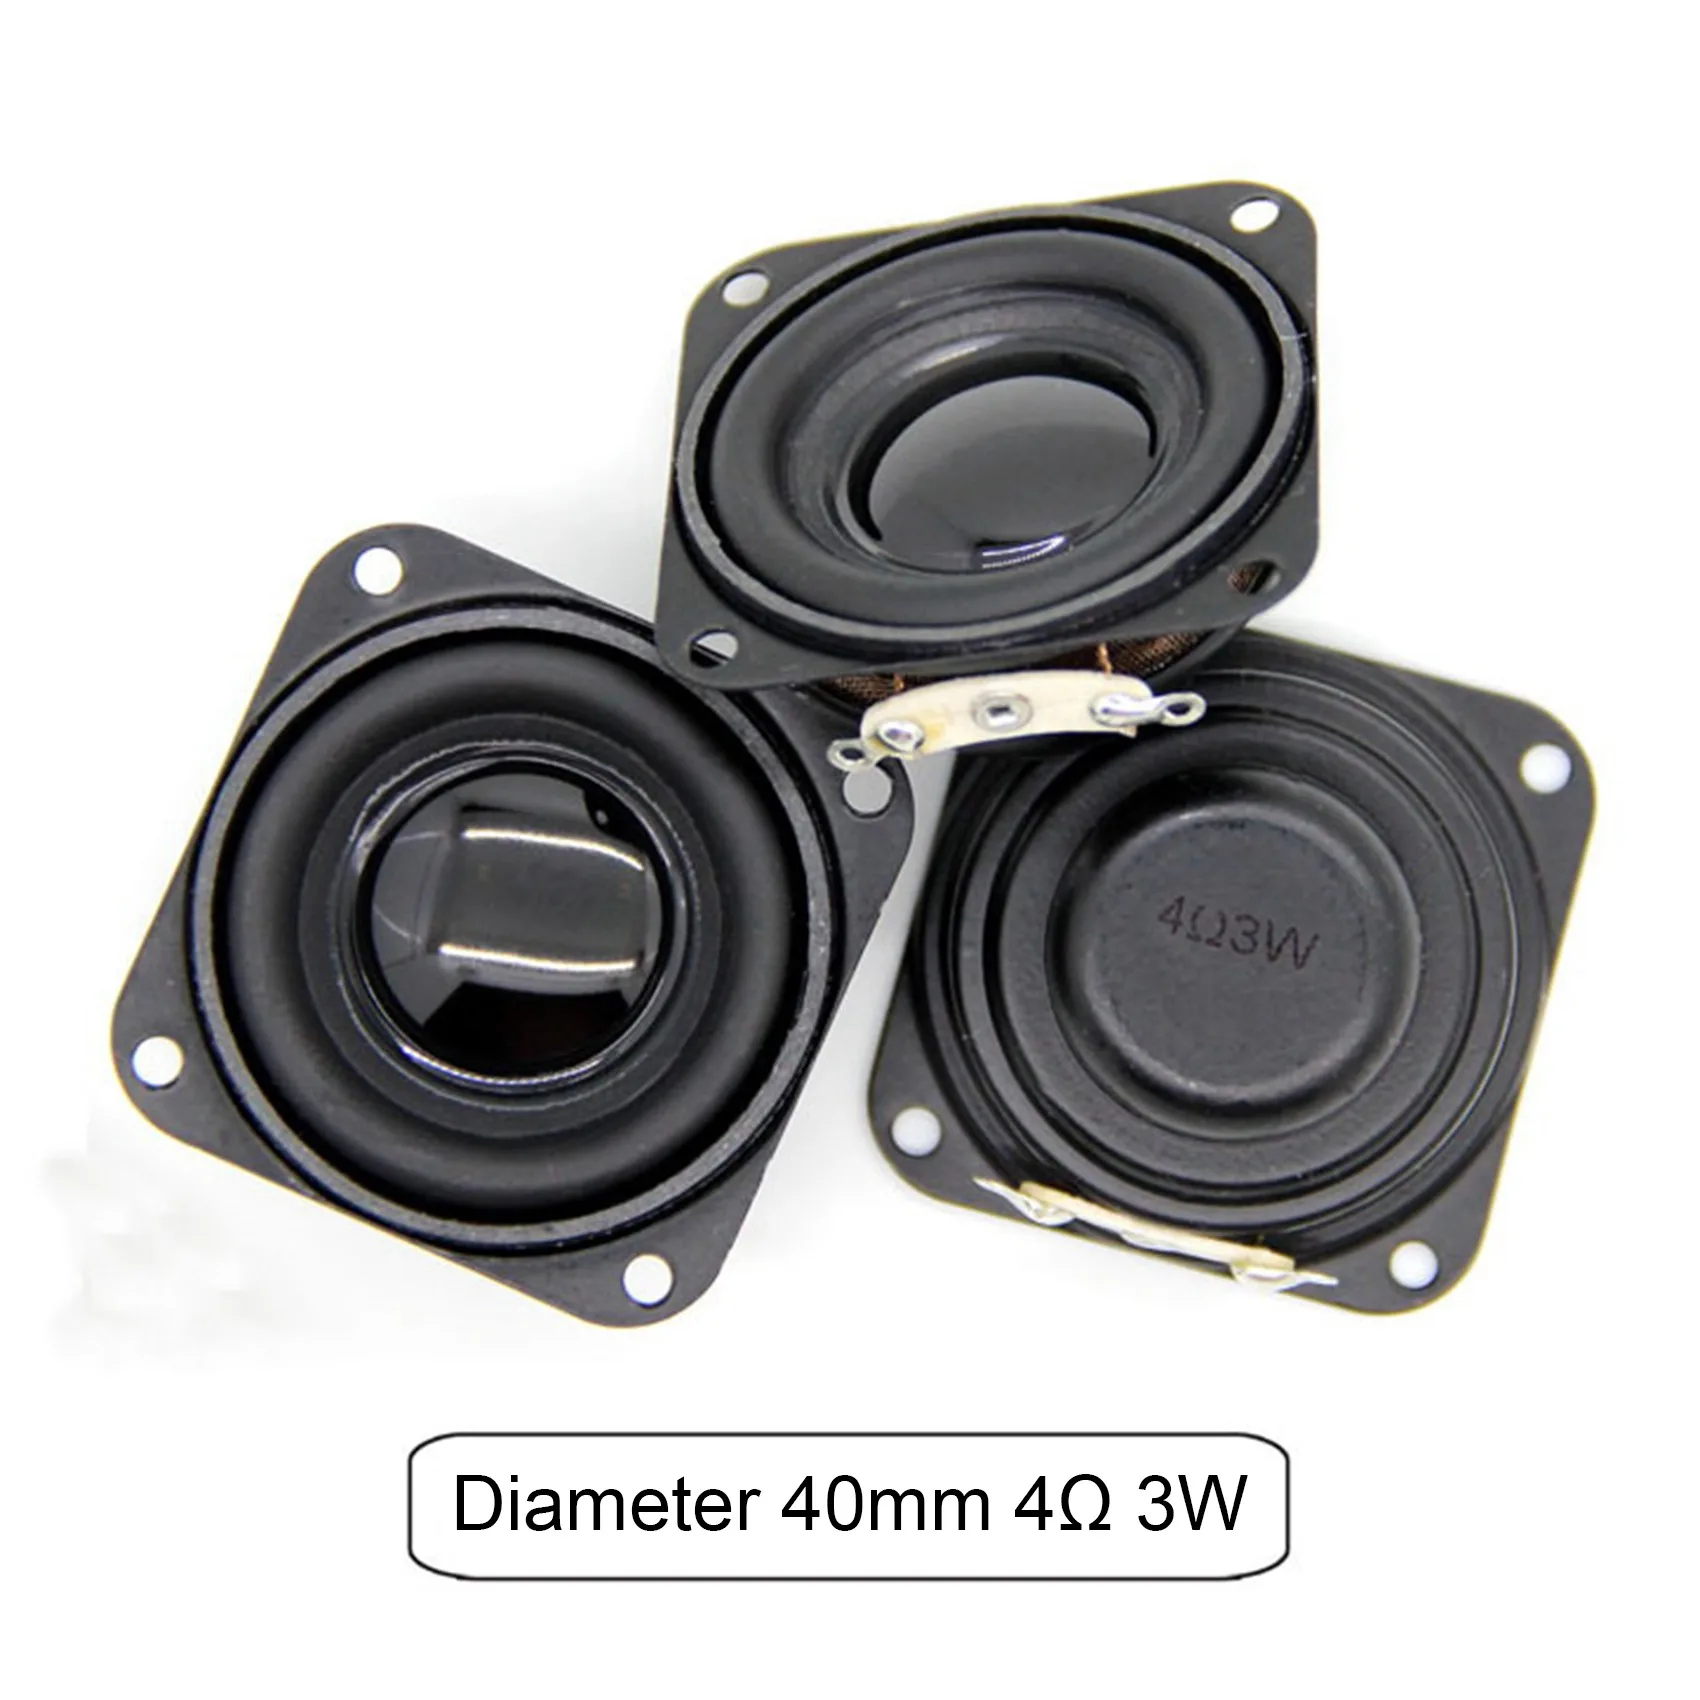 

2PCS 1.5 Inch Audio Speaker 4Ω 3W 40mm Bass Multimedia Loudspeaker DIY Sound Speaker with Fixing Hole for Home Theater